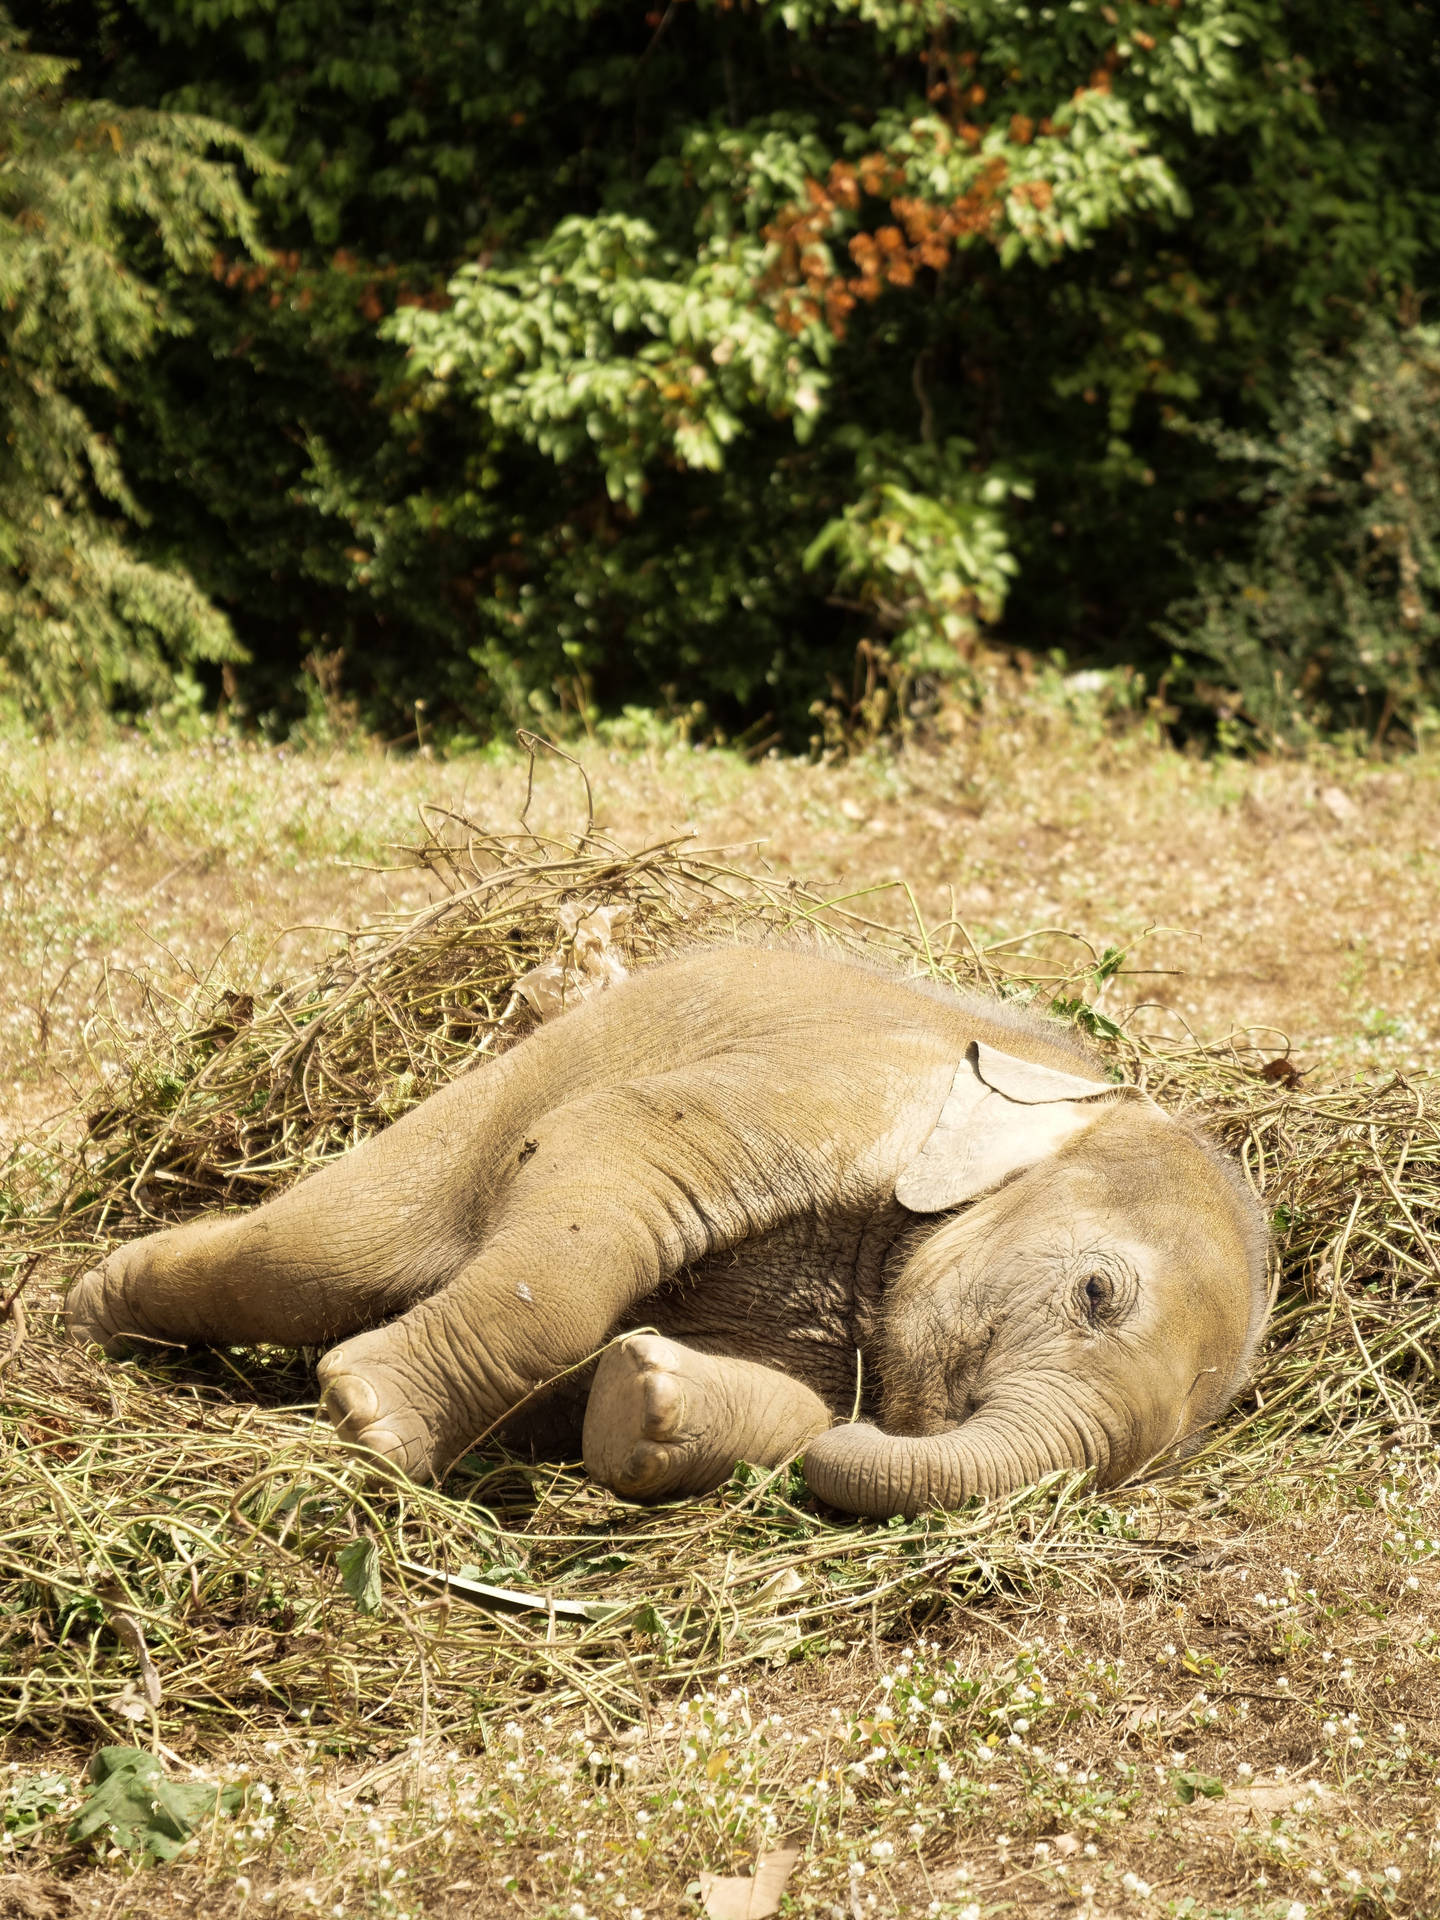 Laying Baby Elephant Iphone Wallpaper